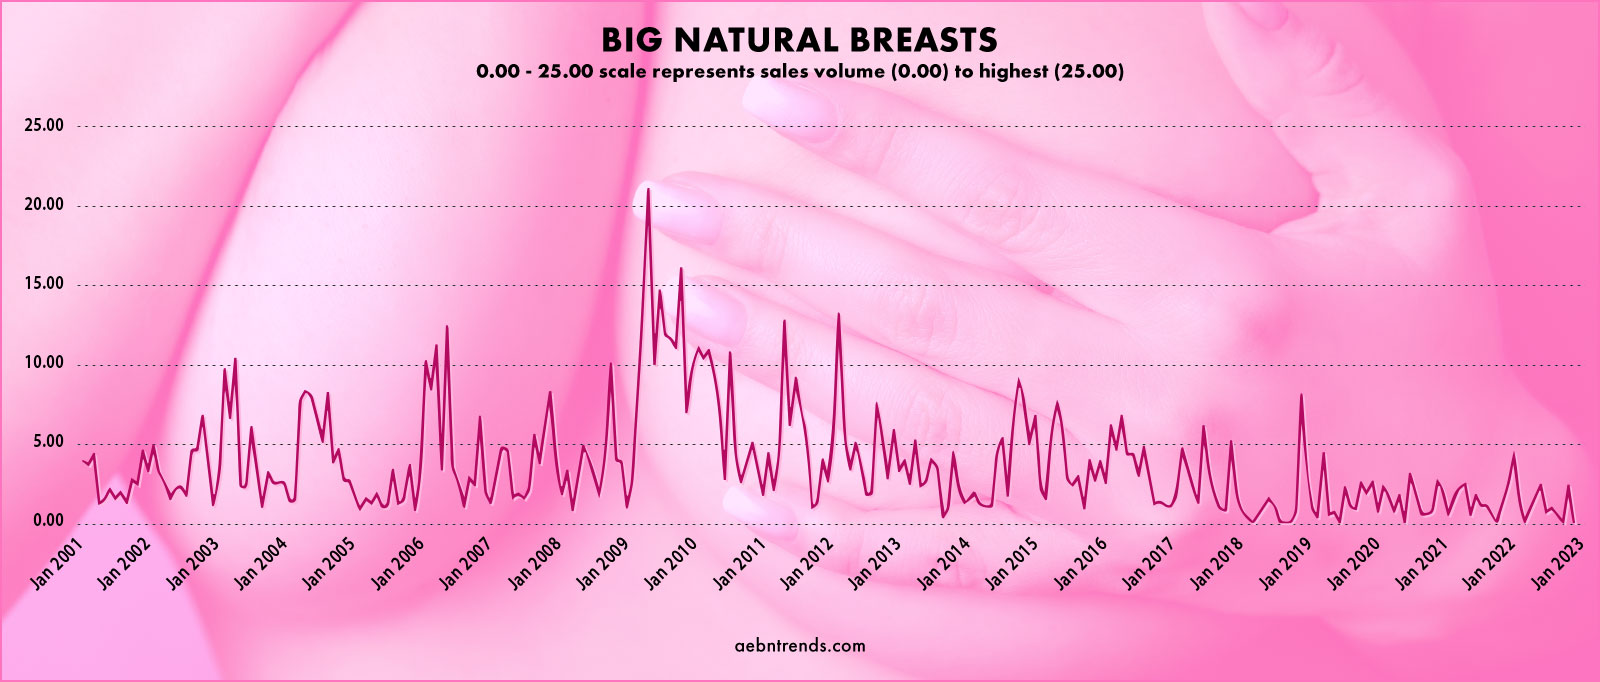 Big Natural Breasts appear to have hit their peak popularity according to our data around 2009/2010.